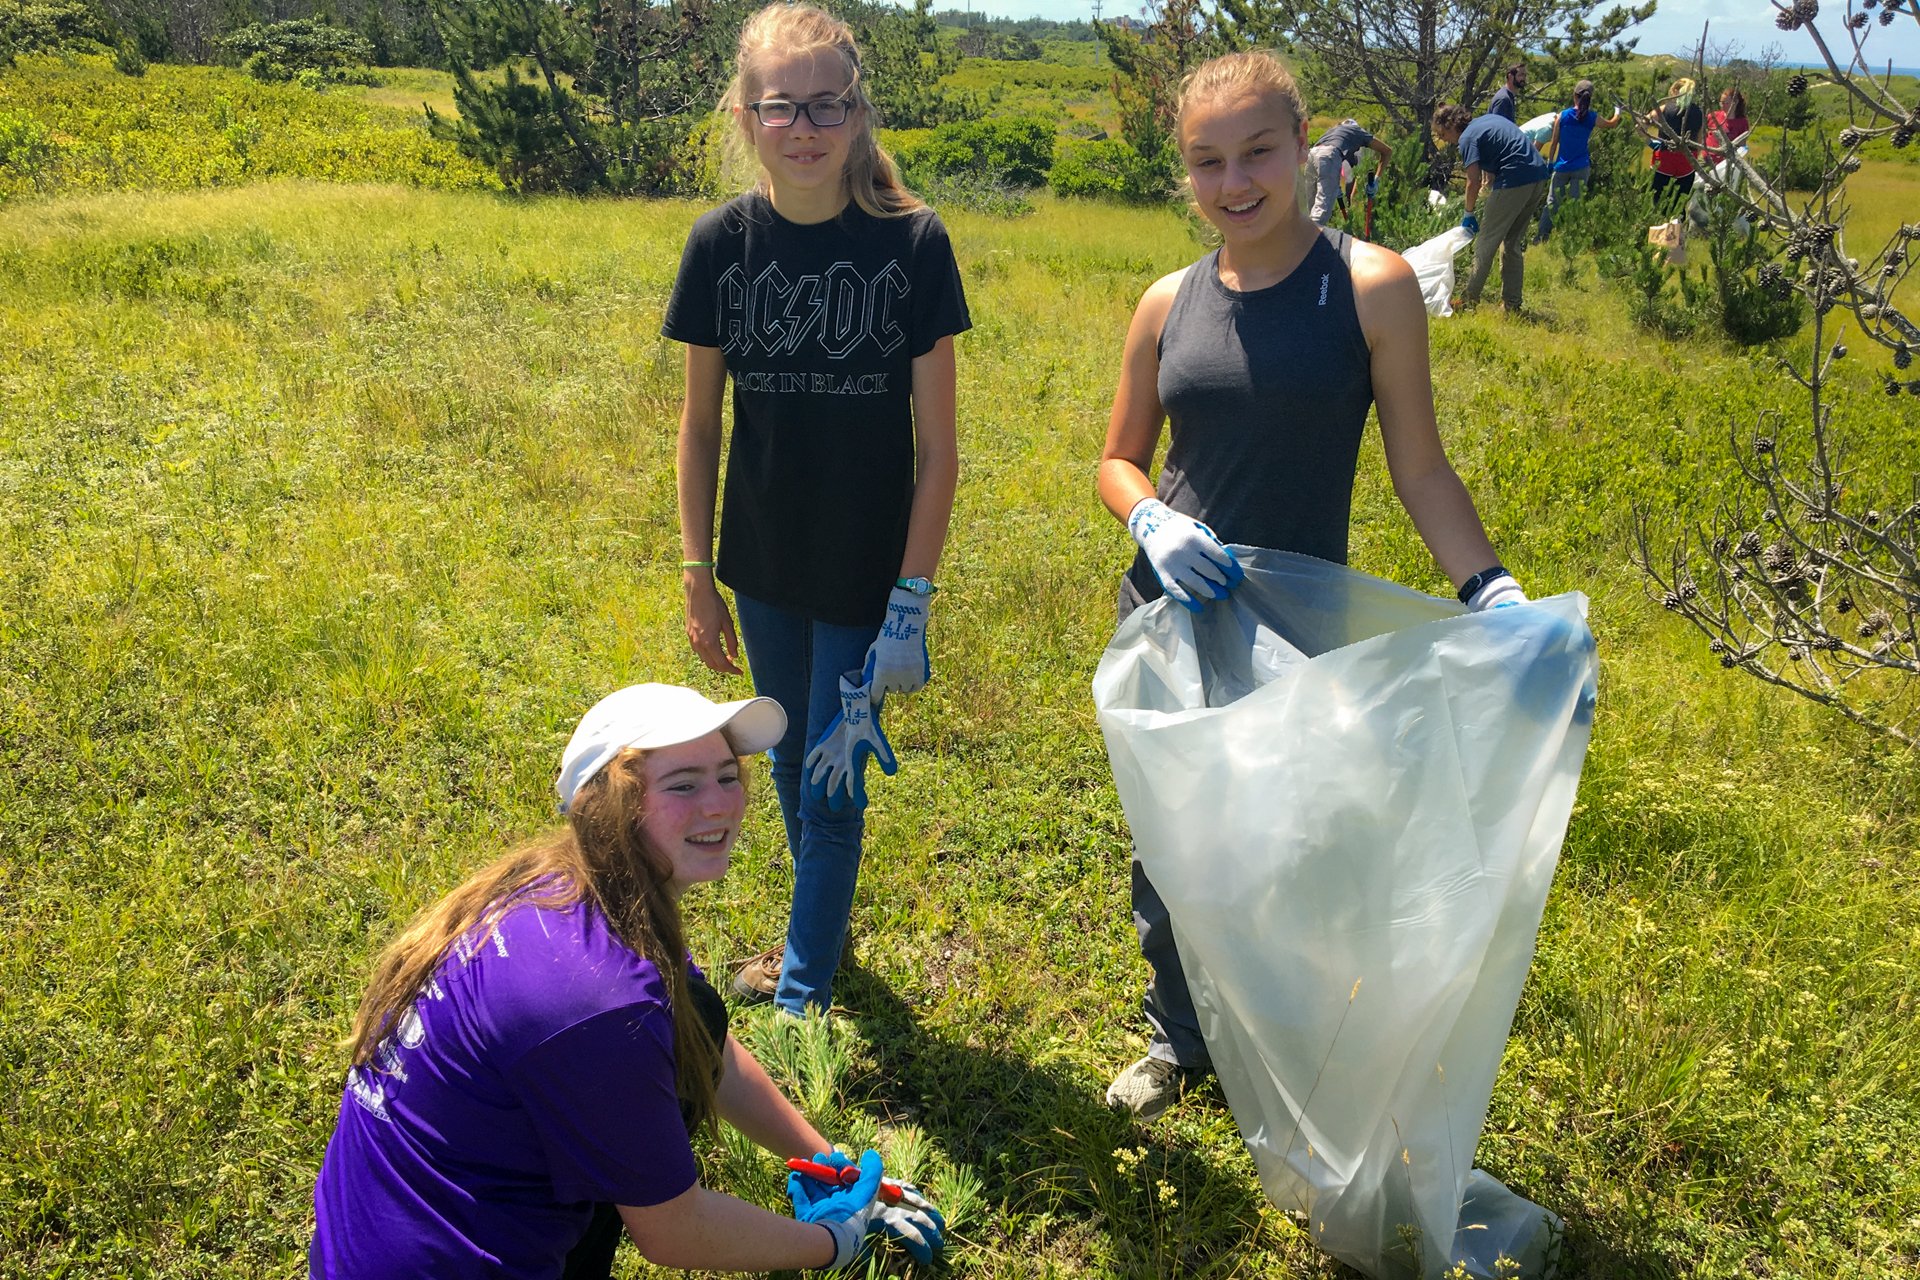 A group of teens from Wildwood Camp participate in a service project removing invasive plant material